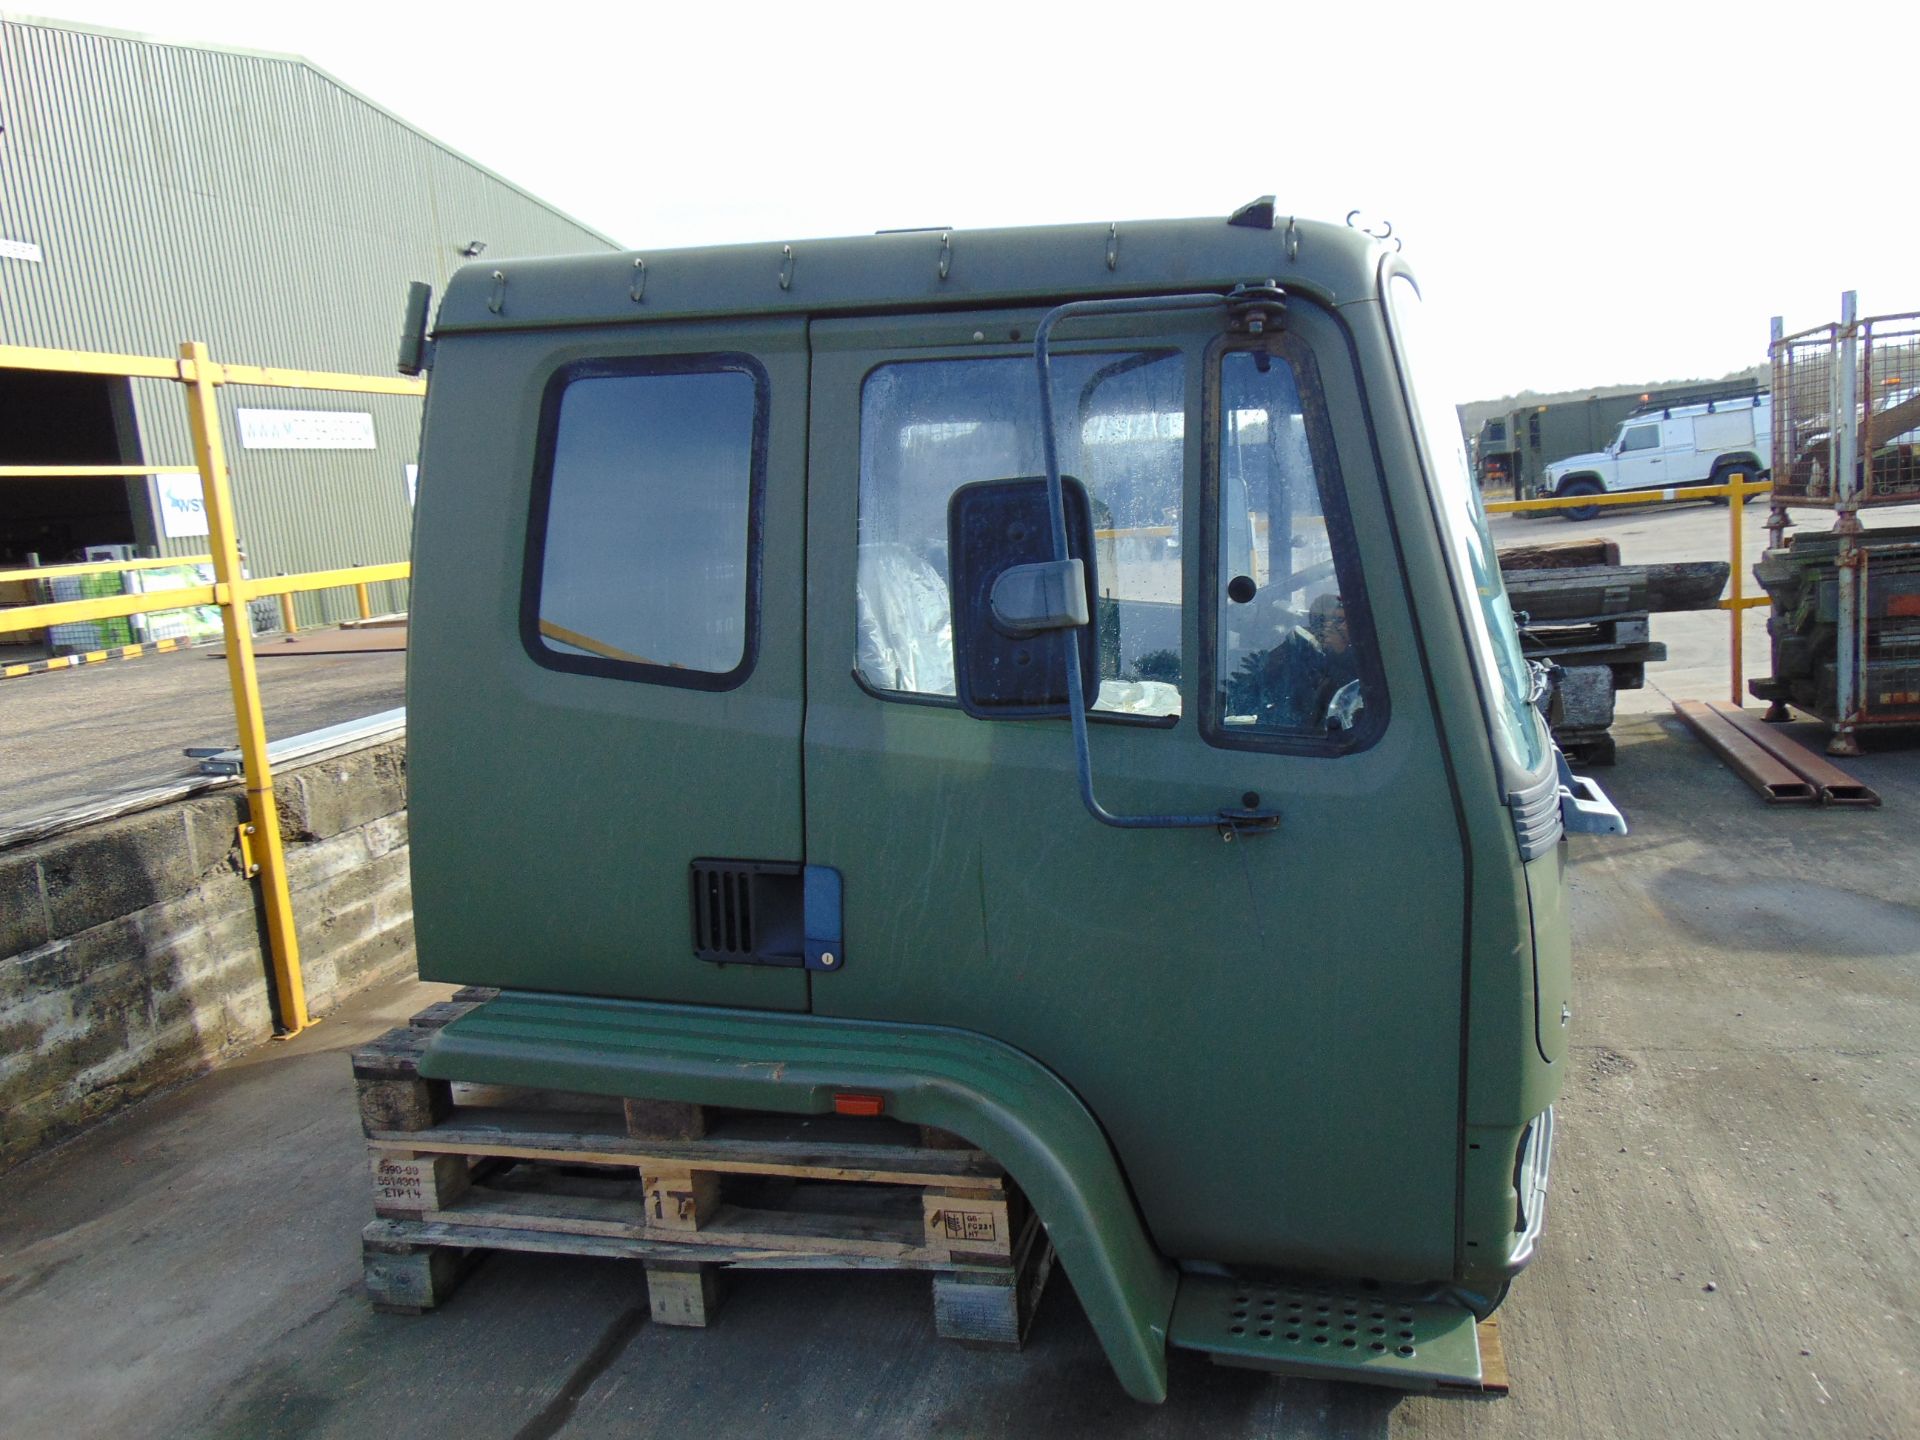 1 x New Unissued Replacement Cab for Leyland Daf 4 tonne fully dressed as shown - Image 3 of 11